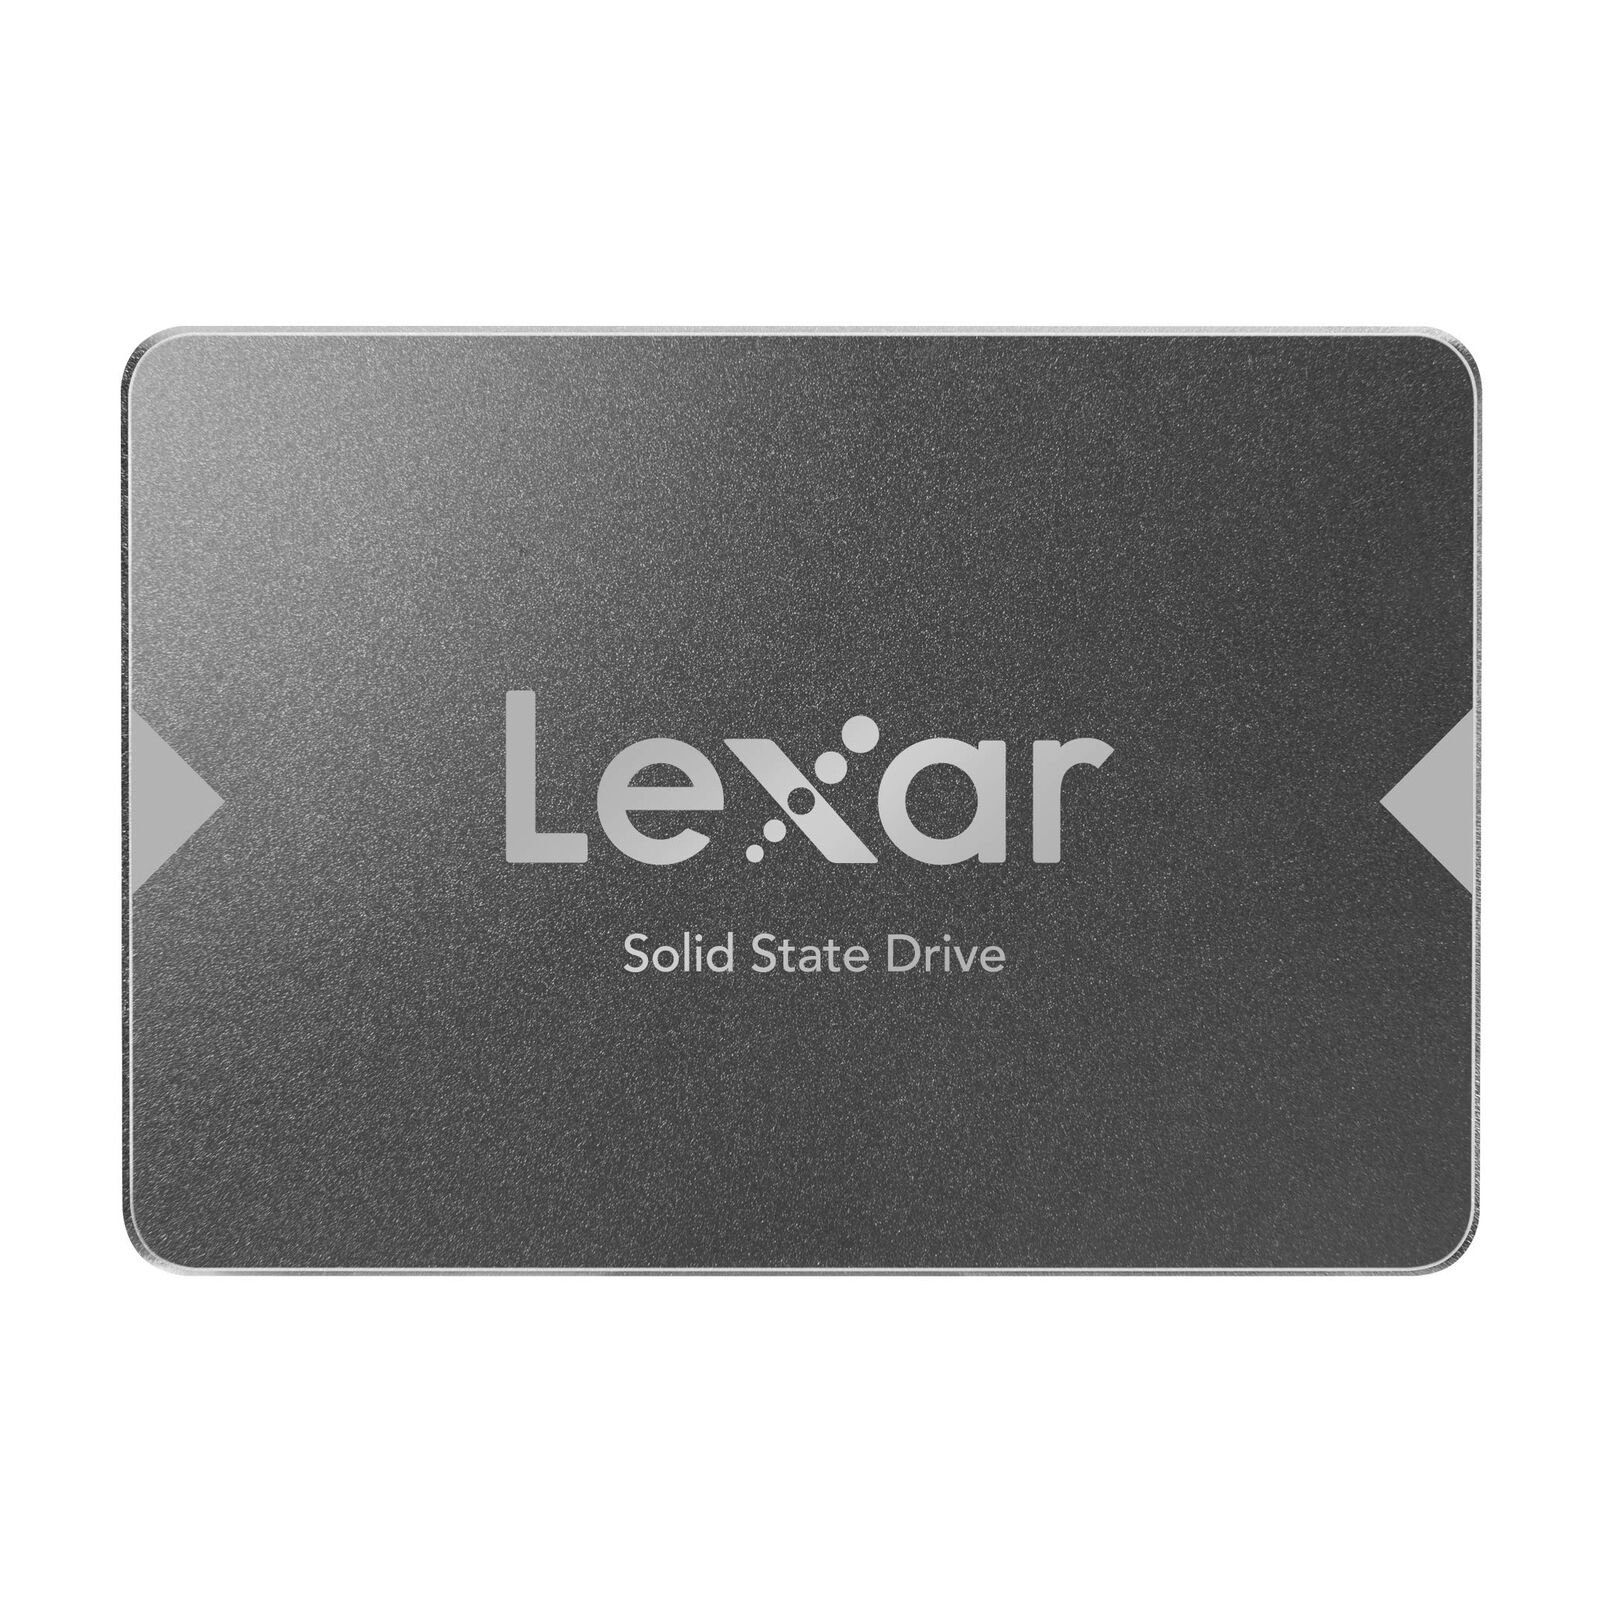 Lexar 256GB NS100 SSD 2.5” SATA III Internal Solid State Drive, Up To 520MB/s...